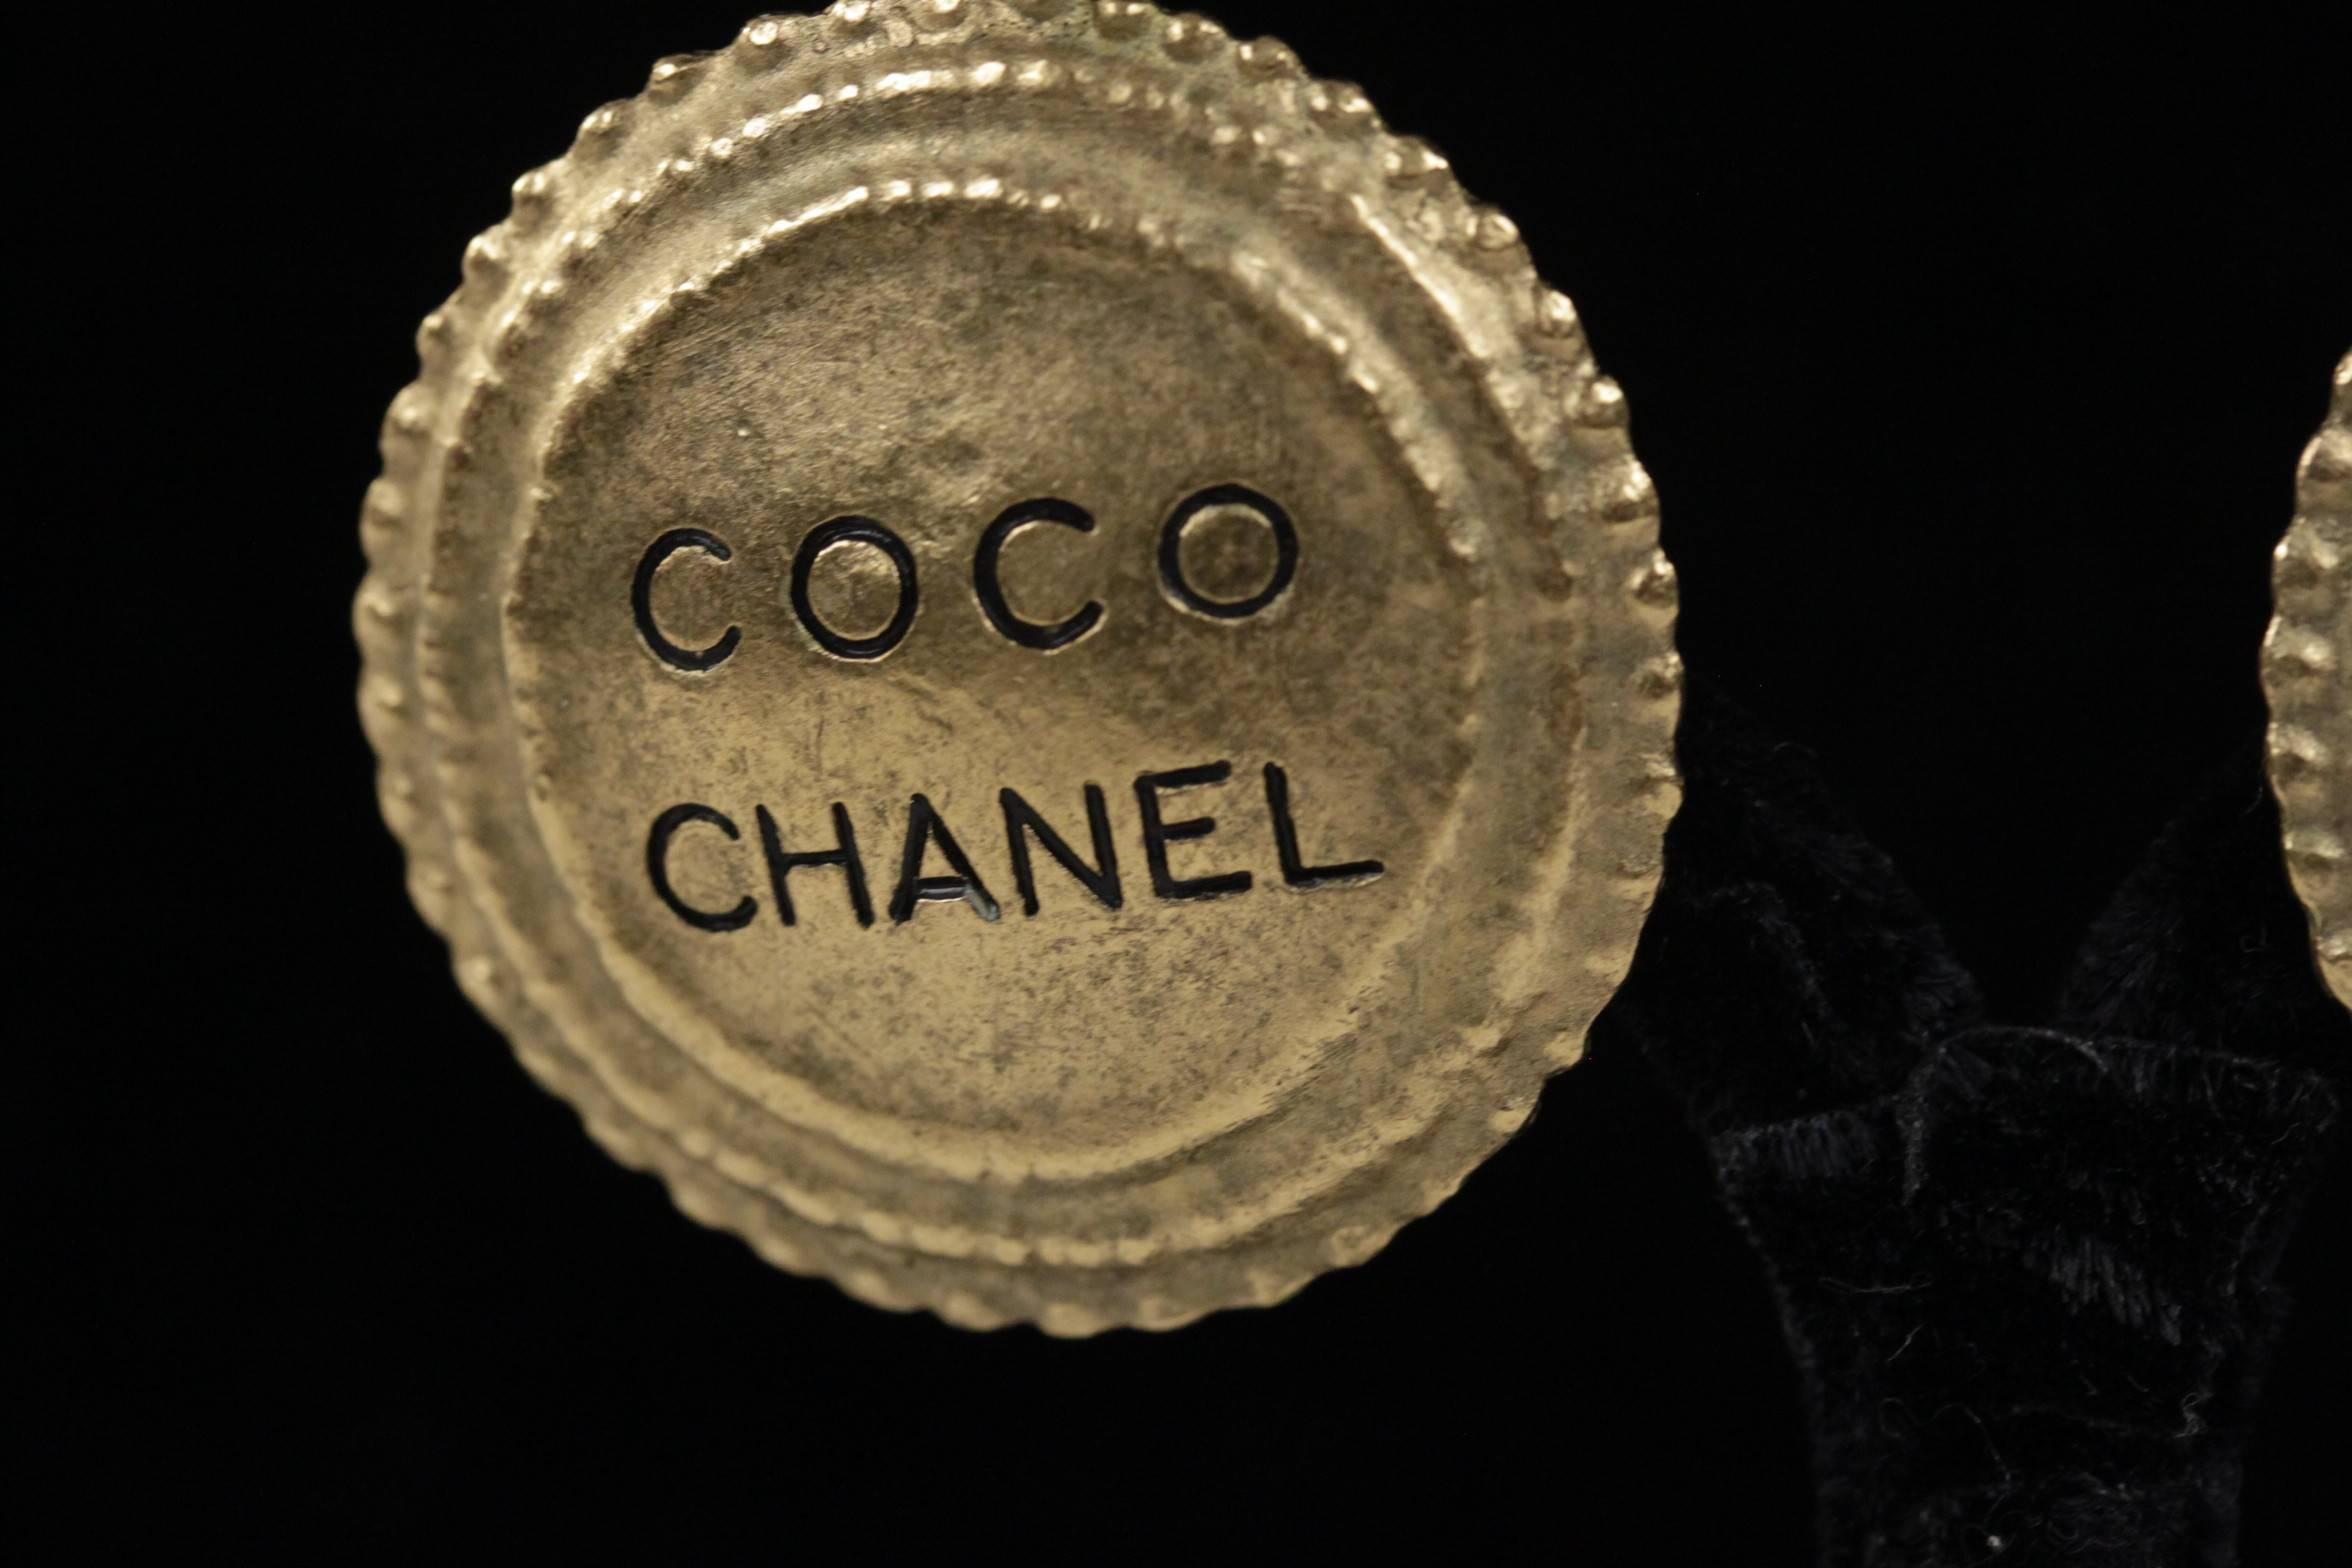  - Gorgeous vintage CHANEL gold metal clip on earrings

- From the 1994 Autumn collection

- Round gold metal

- 'COCO CHANEL' signature engraved on the front

- Signed ' C CHANEL R - 94 CC A - MADE IN FRANCE' in a oval mark on the back

-